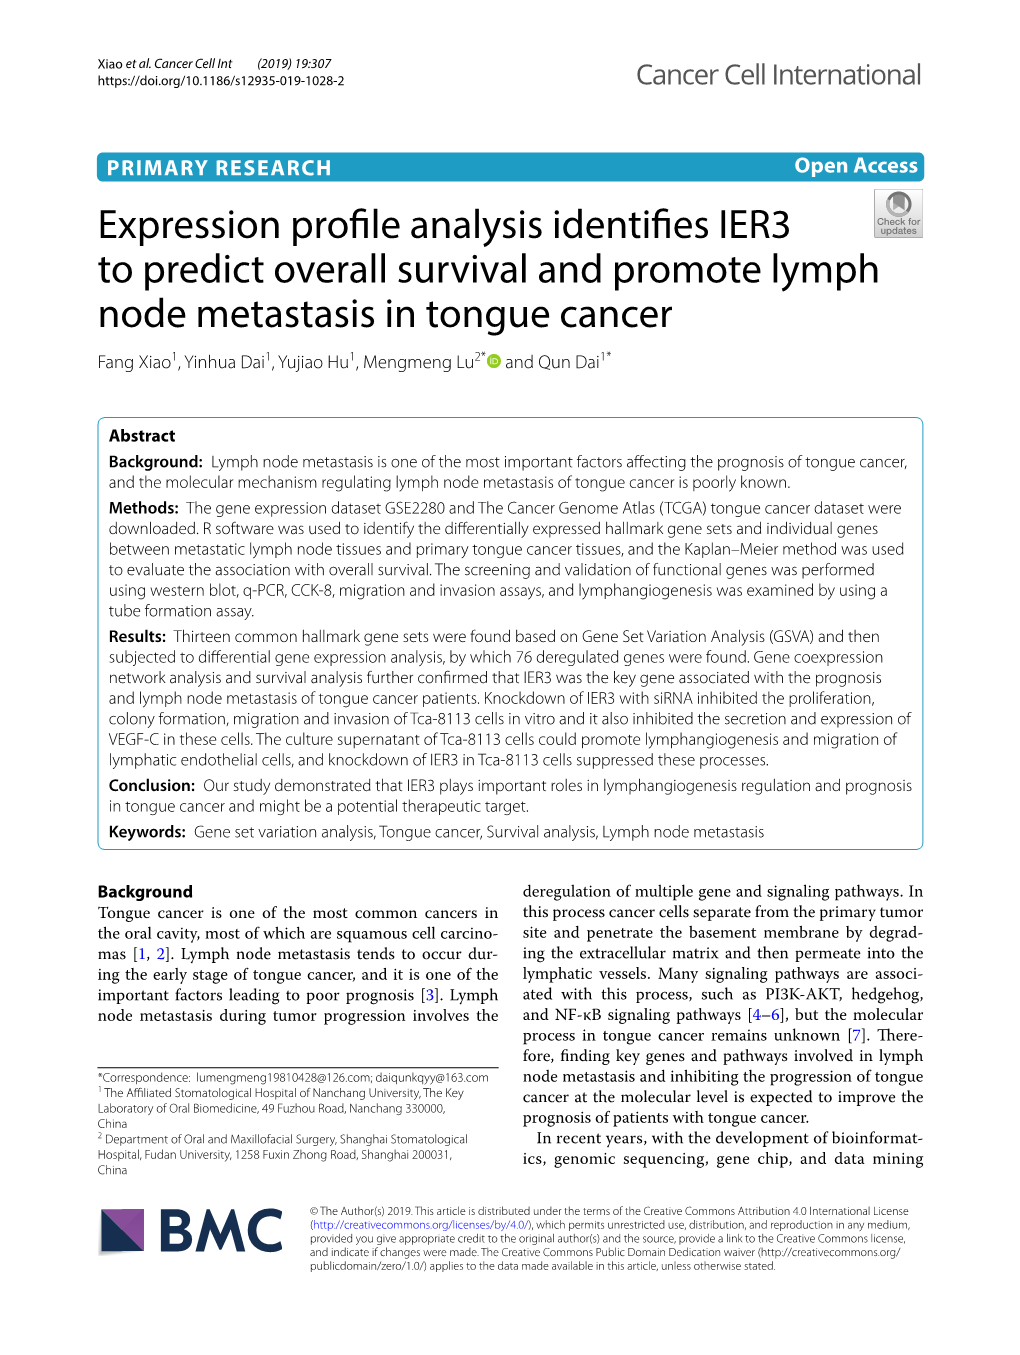 Expression Profile Analysis Identifies IER3 to Predict Overall Survival And